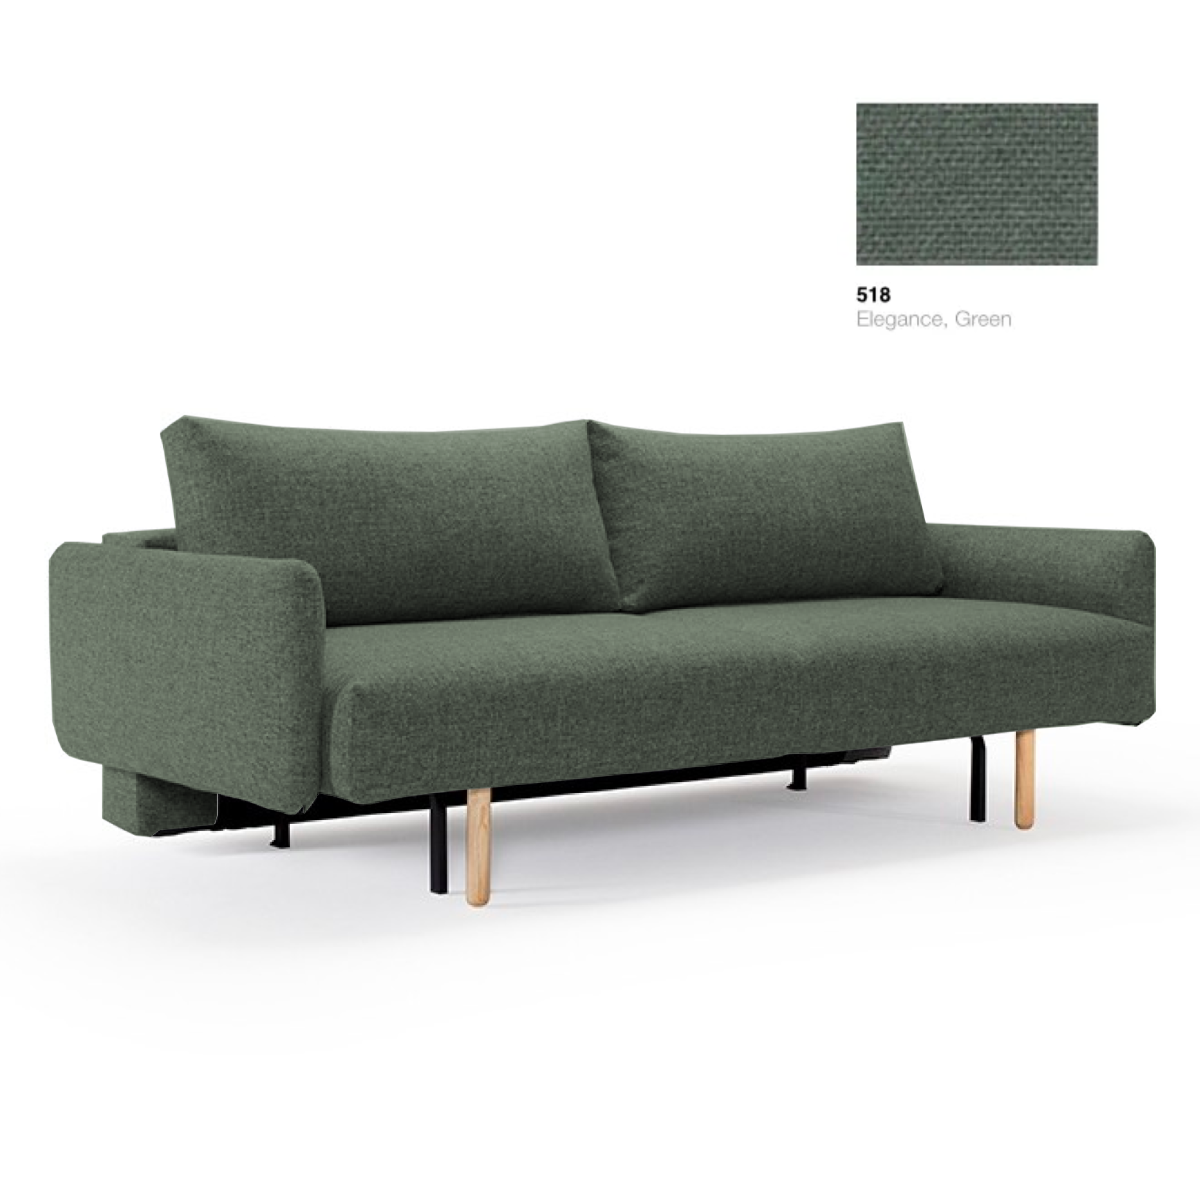 Innovation Living Frode Sofa Bed w. Arms, 518EleganceGreen w215xd105xh83cm